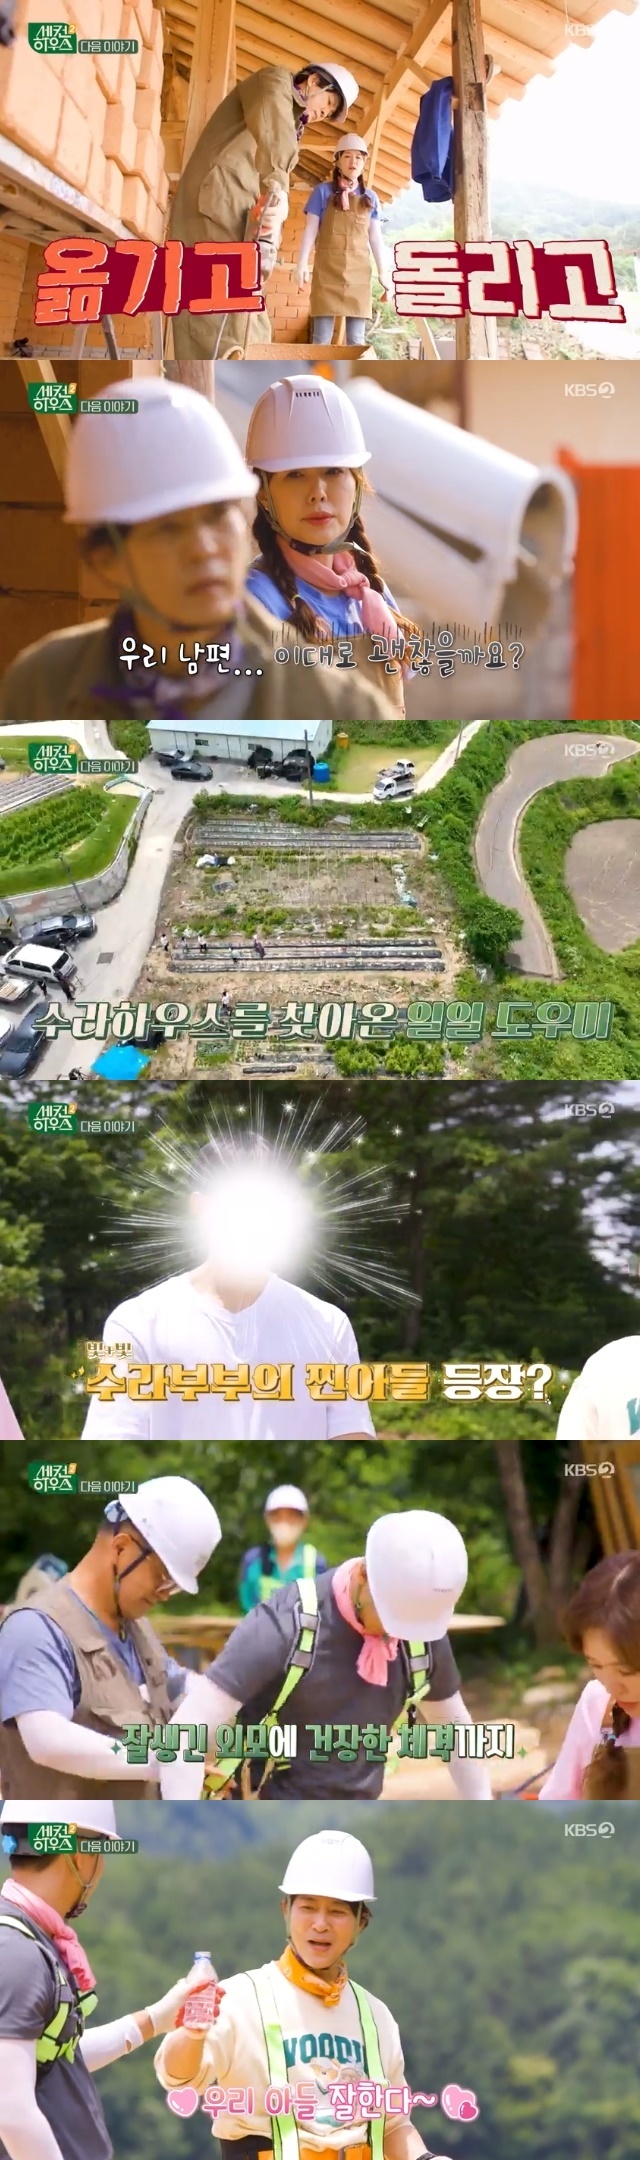 Choi Soo-jong Ha Hee-ra Couples son personally scrambled to save his parents secondHouse in Danger.In the 4th KBS 2TV entertainment second House broadcast on June 22, an unexpected Danger came to the second house of Choi Soo-jong and Ha Hee-ra Couple.On this day, Choi Soo-jong, Ha Hee-ra Couple, with the help of Park, unearthed the upper kitchen of the house during the demolition and found baby birds living in the vents.Choi Soo-jong, who was upset by the pouring baby bird as soon as he pulled out the upper intestine, hurriedly put all the baby birds in the nearby box and confirmed that one was unharmed.As a result of getting advice from Dr. Park, a bird he knows, the type of bird is tit bird. Tiny tit bird nests in bricks, traffic light gaps, and mailboxes.Choi Soo-jong, Ha Hee-ra, and Park made a new house for baby birds using a rubber flowerpot and hung it directly on a nearby tree.Fortunately, the mother bird came to the new house the next day. The three people could not hide their pride, saying that the Demolition was delayed due to this, but six lives were saved.Demolition A few days later, Professor Park Sang-wook, who summoned Choi Soo-jong and Ha Hee-ra Couple to the office, said, There is a serious situation.I was in the process of demolishing, but my house has some problems. I need to take measures. It seems that at least 20 million won will be needed to build the secondHouse. Demolition was once stopped.Professor Park Sang-wook said, When the house was torn down, the rafters had a lot of problems. There should be a foundation stone, but it seems to have been lost. Overall, it needs a lot of reinforcement. It is tight in our budget (120 million won), but I think we should try it.We have to make a big decision, he explained.Ha Hee-ra and Choi Soo-jong wrote that its unbelievable, its so embarrassing, its so complicated in my head, and that the foundations arent strong enough that maybe the house doesnt stand up very well.Savoie is in trouble because the cost is 20 million won more and the construction period is extended more than half a month. It is disadvantageous to us. Couple, who was placed in the all-time Danger, nevertheless continued construction.However, Choi Soo-jong alone can not handle the task of moving, turning, and shoveling. At this time, Couples sons scramble was noticed as a daily helper.The villagers praised their sons handsome appearance and sturdy physique, saying, Its my father and Savoies bread and Why are you so handsome?Even his workmanship resembled his father Choi Soo-jong, and his attention was focused on his son.